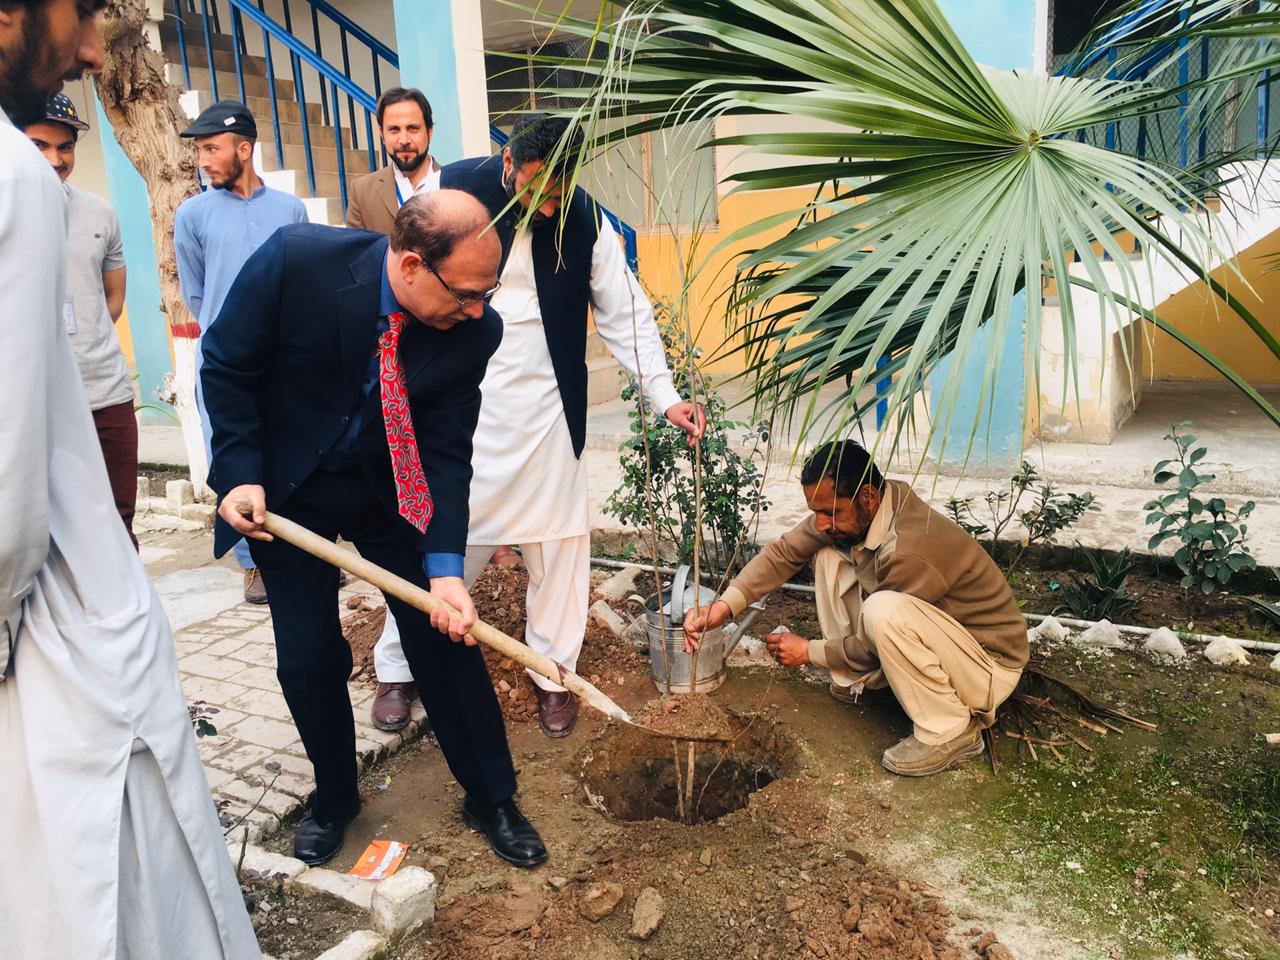 "Plantation Drive for green and healthy Pakistan "